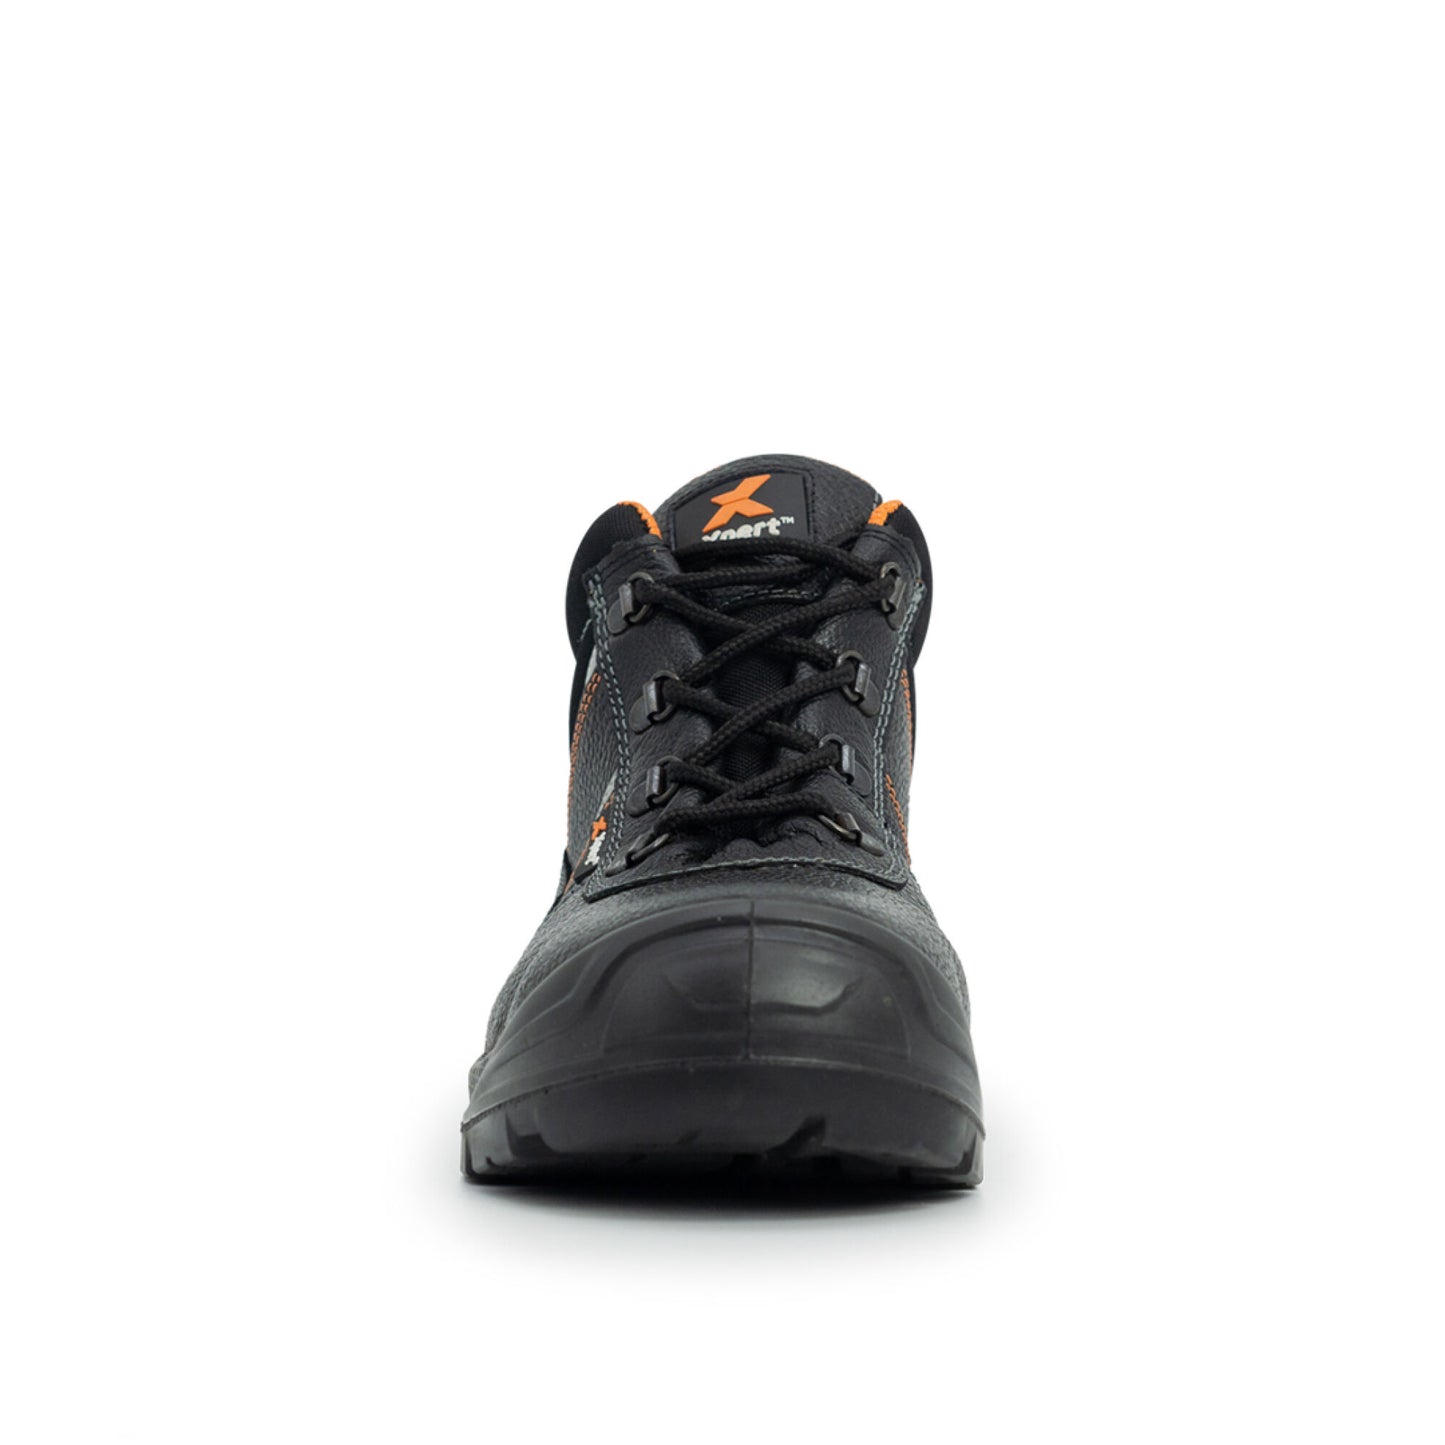 Xpert Force S3 Safety Contract Boot - Black